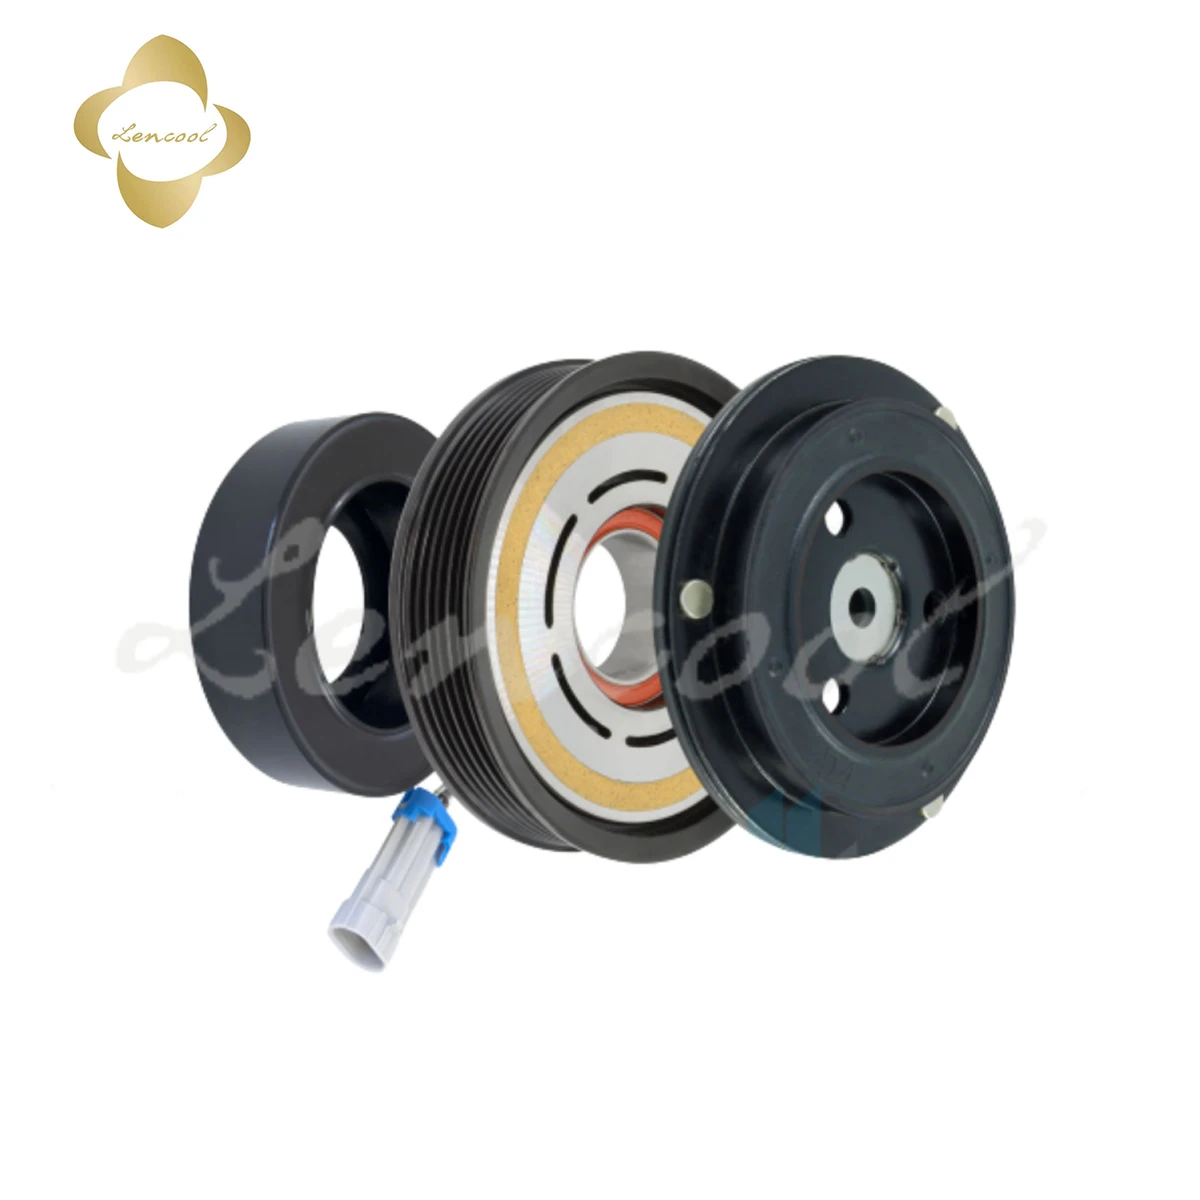 

AC A/C Air Conditioning Compressor Clutch Pulley FOR OPEL VECTRA SAAB 9-3 2.8 TURBO CADILLAC BLS 5048475 12758380 12792669